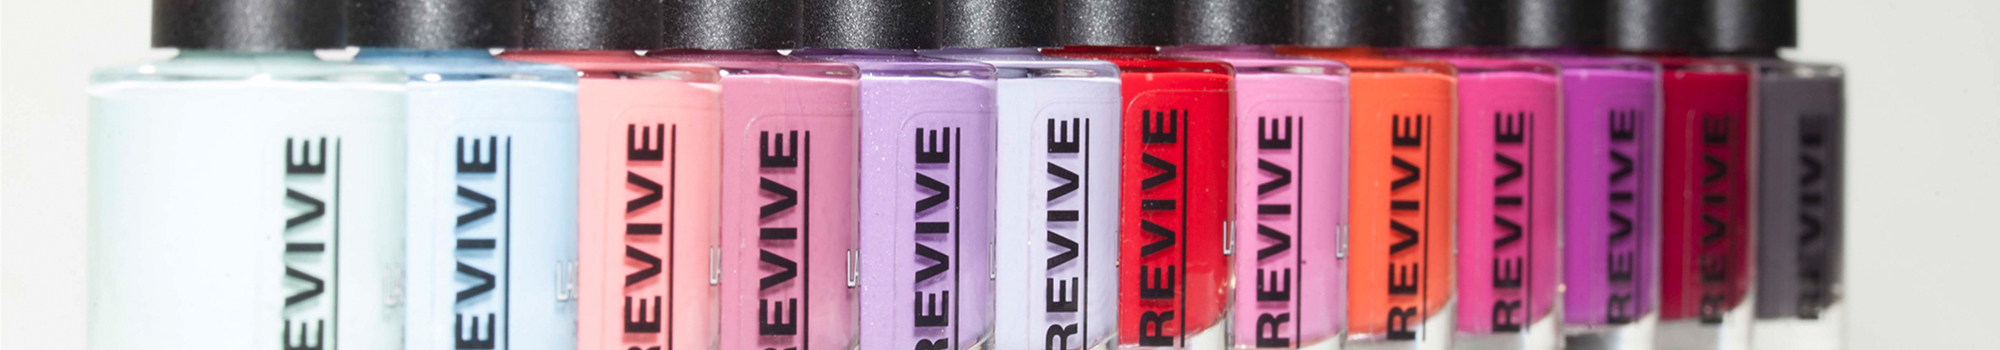 Line of Revive Colors